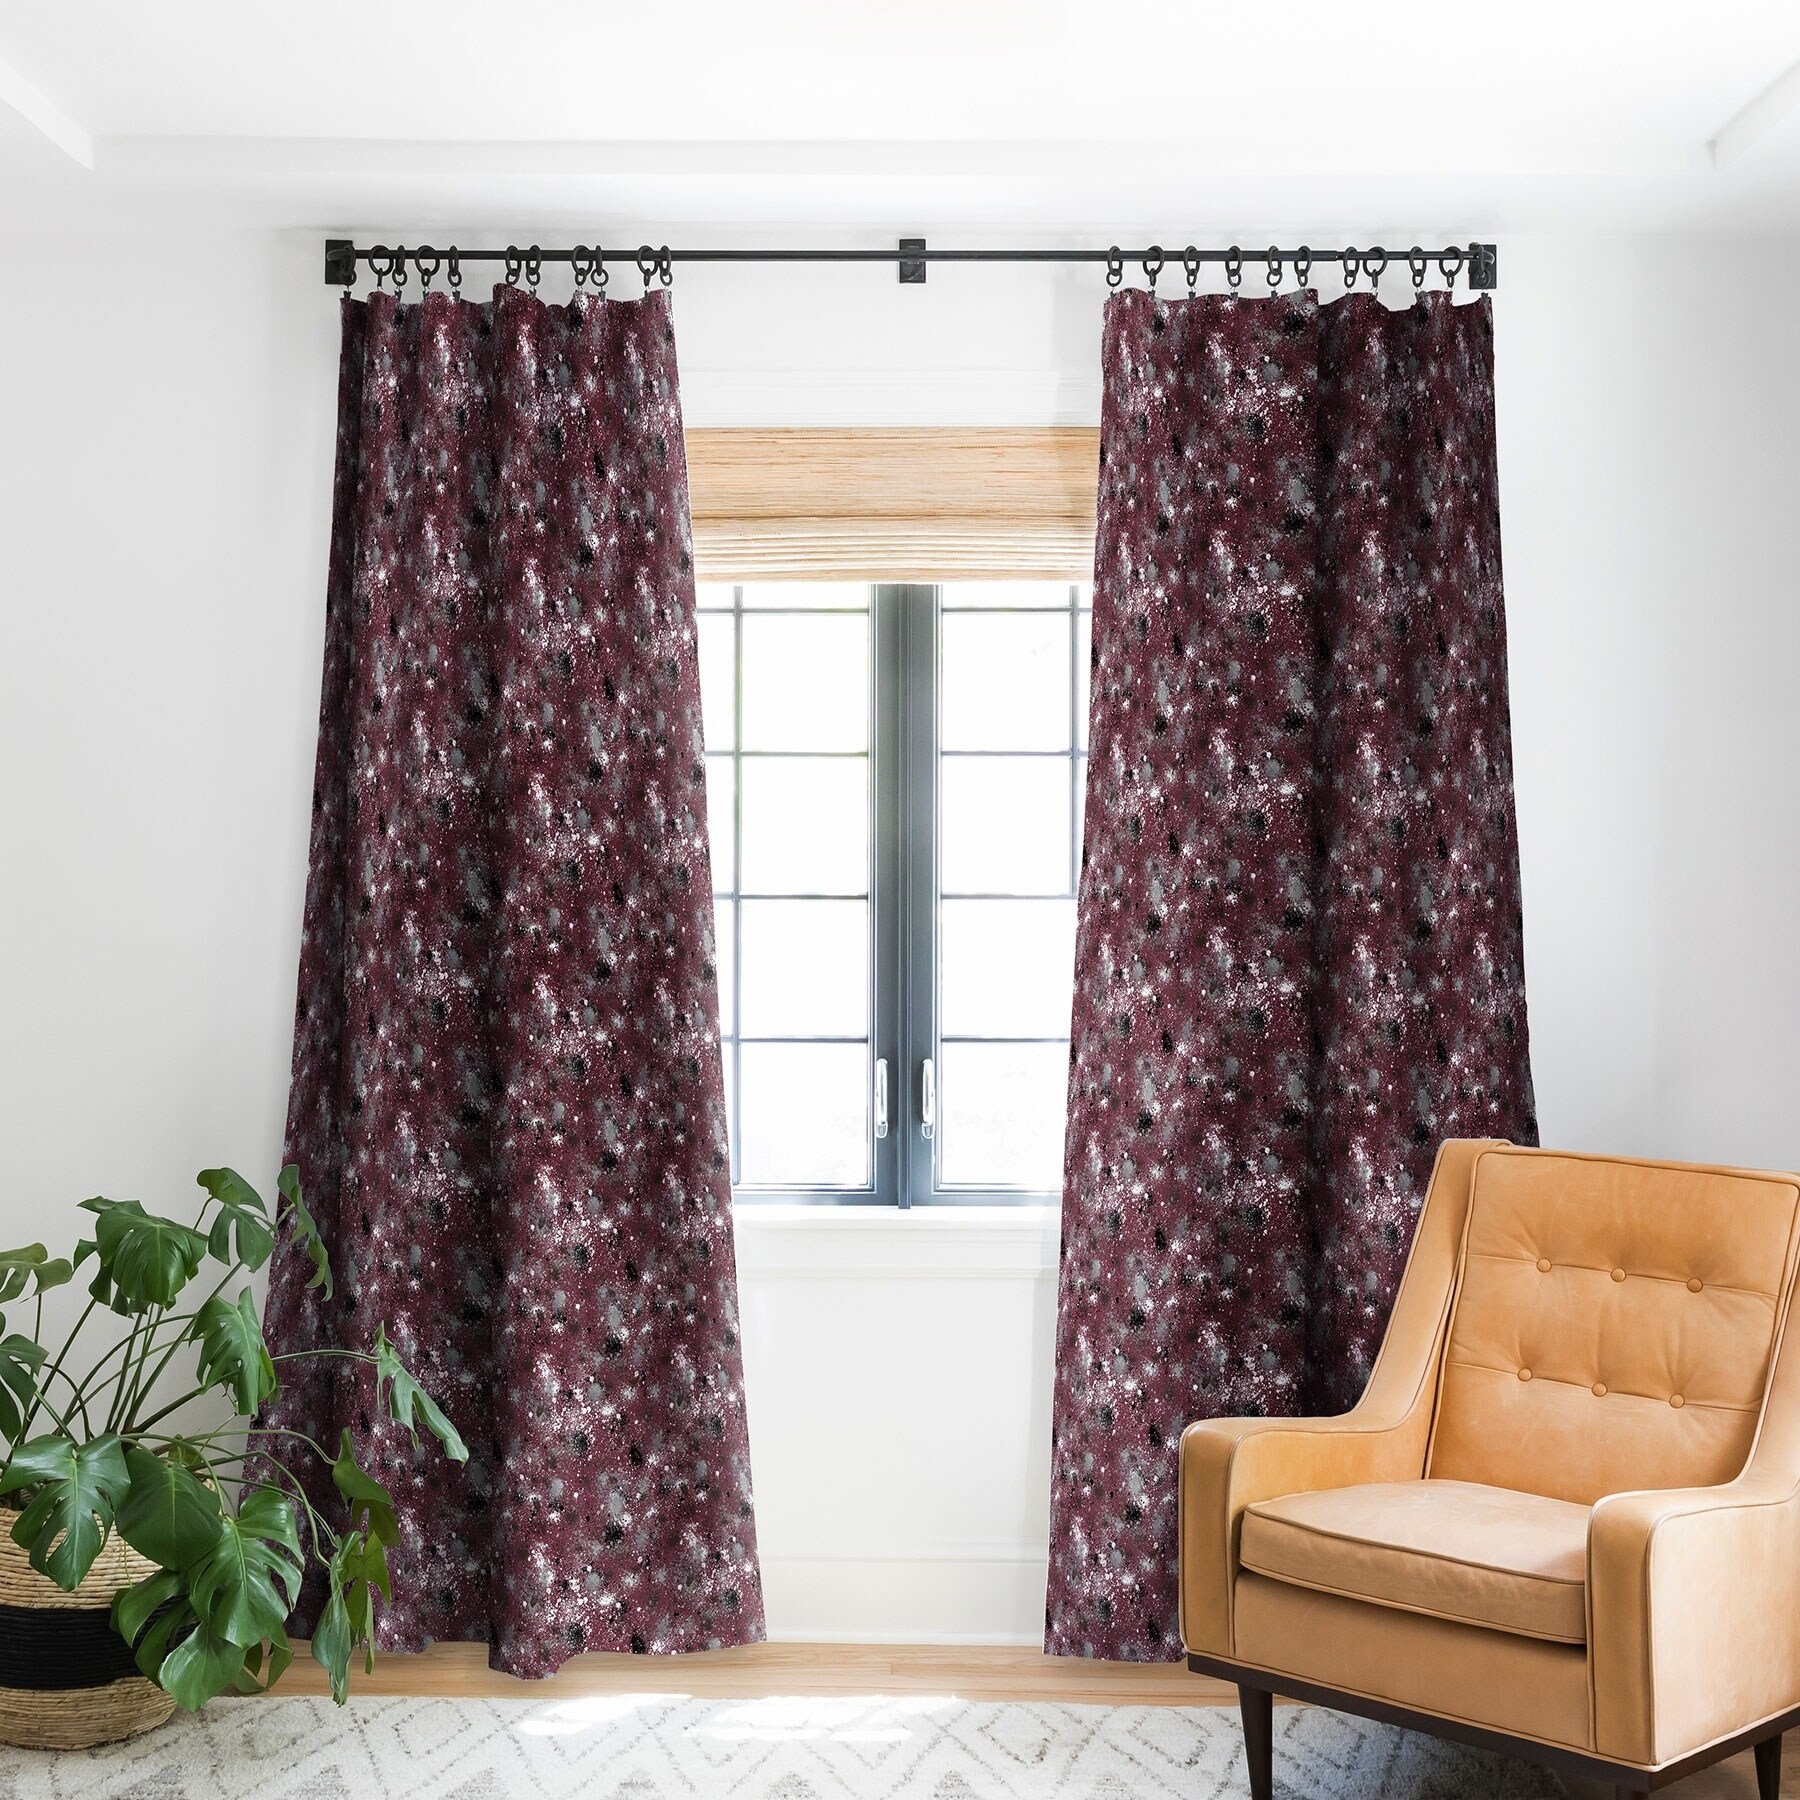 Single Contemporary Prairie Blackout Curtain Panel with Leafy Design 